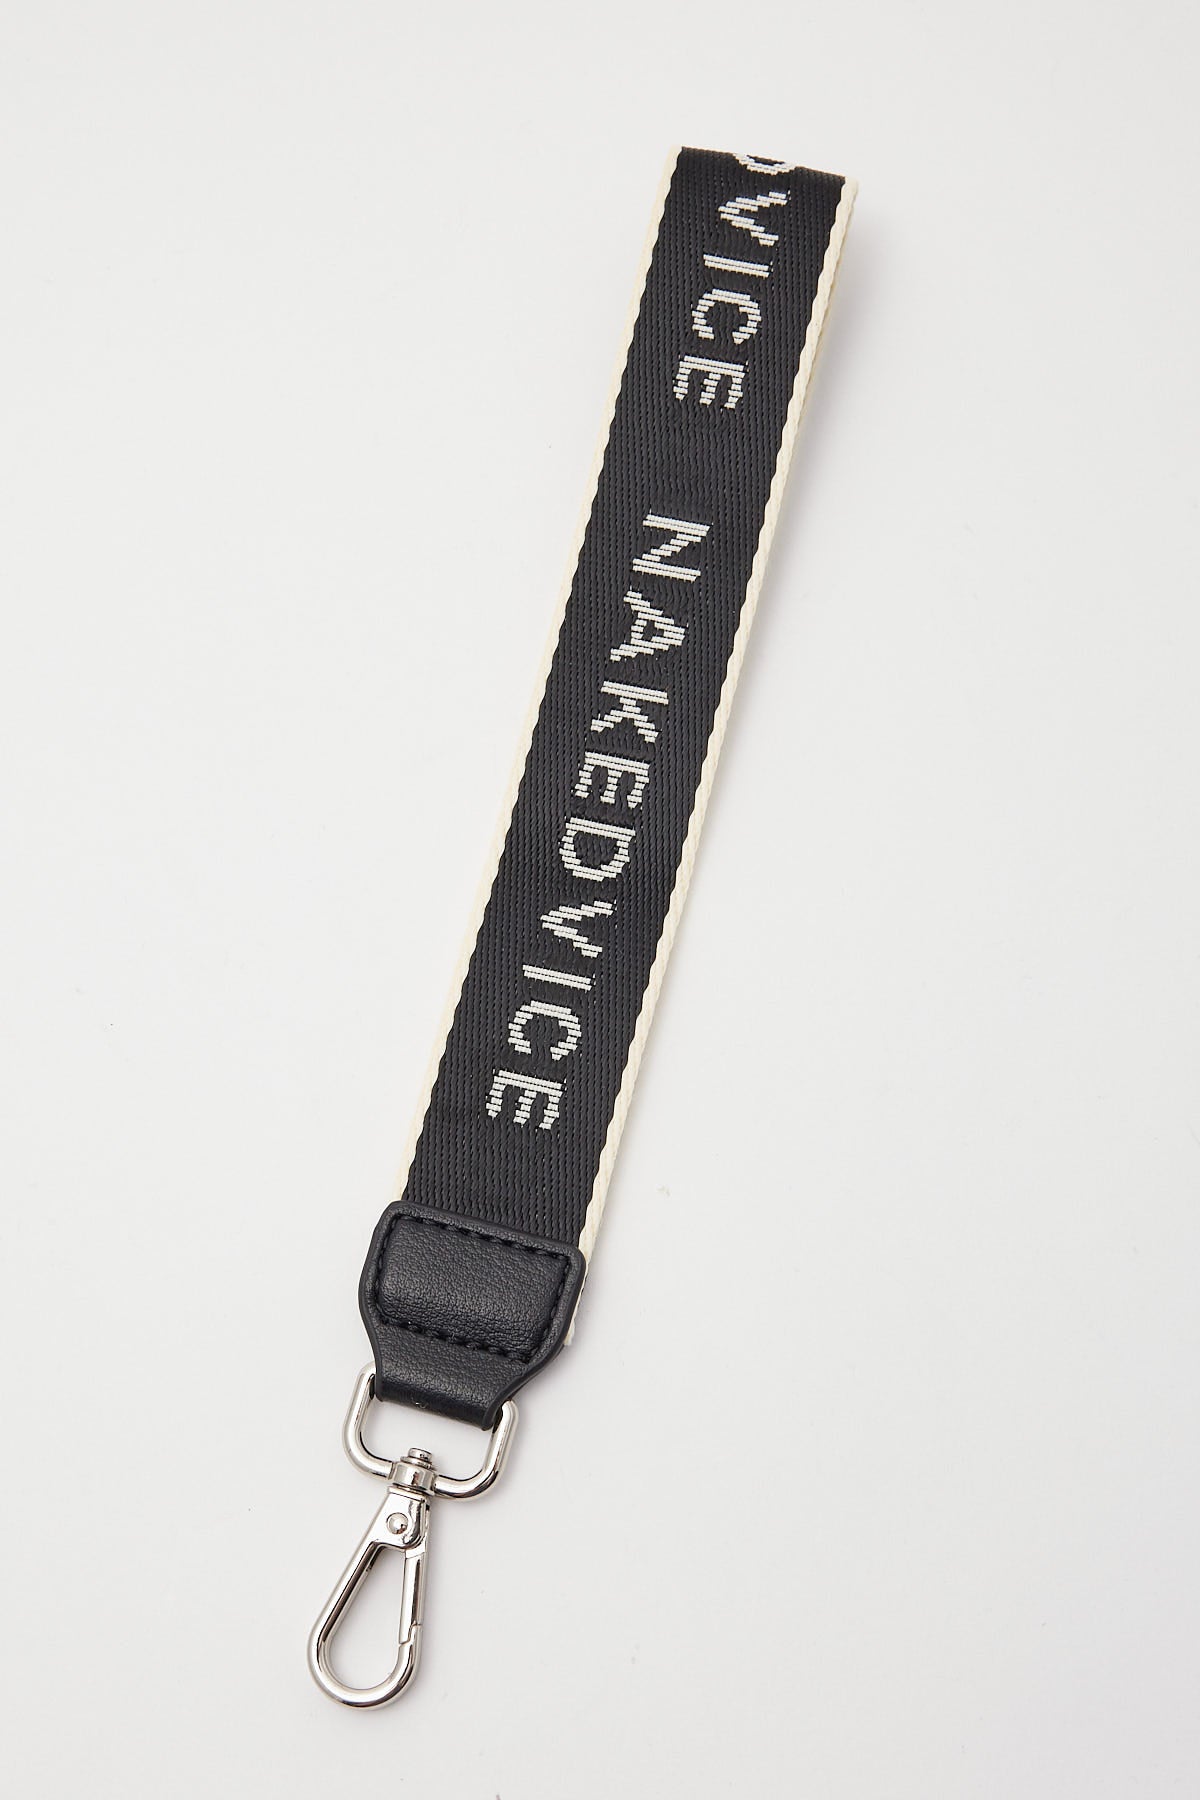 Nakedvice The Rue Key Chain Black/Silver